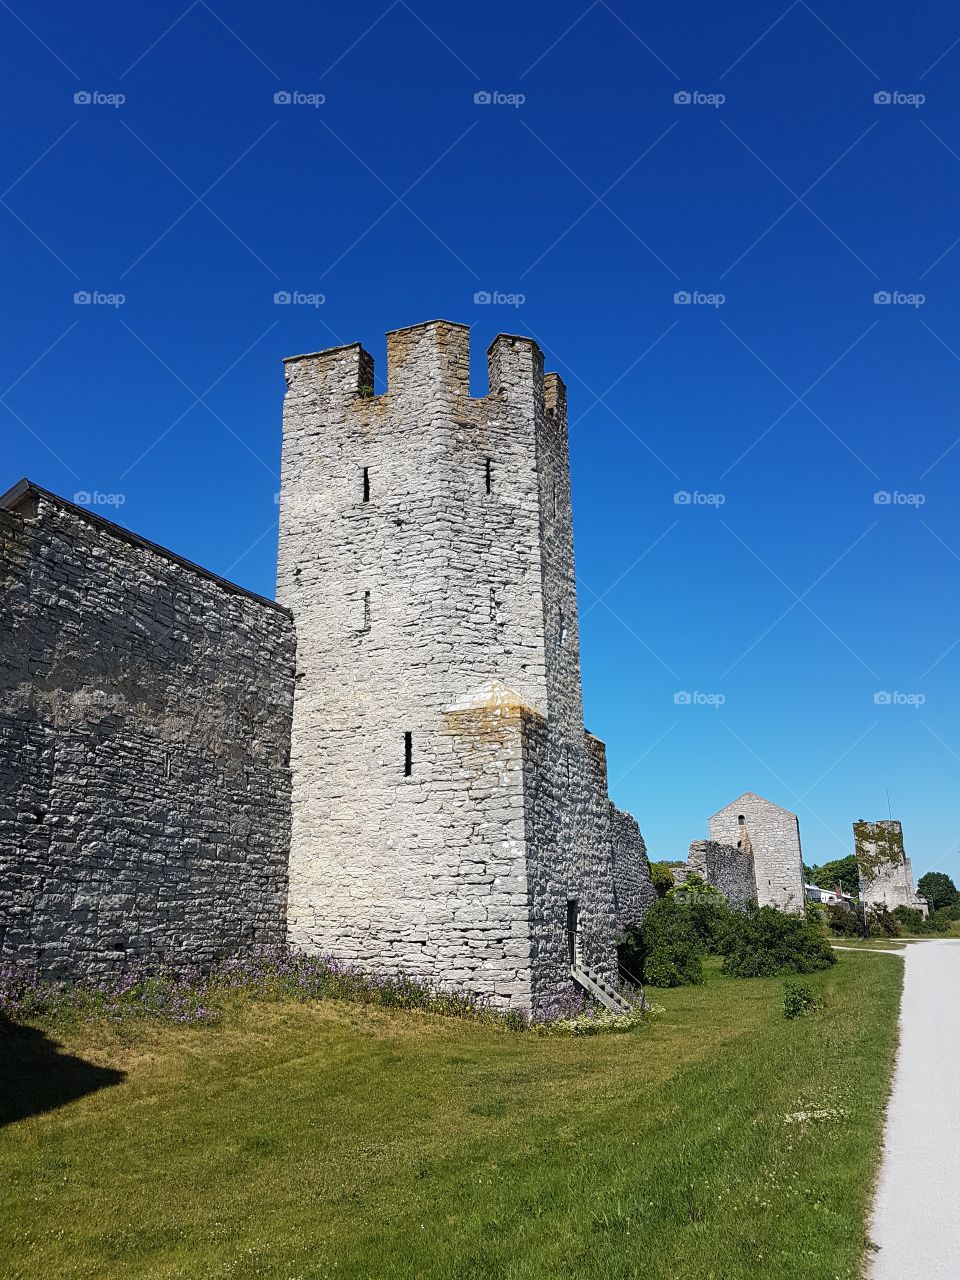 Visby wall